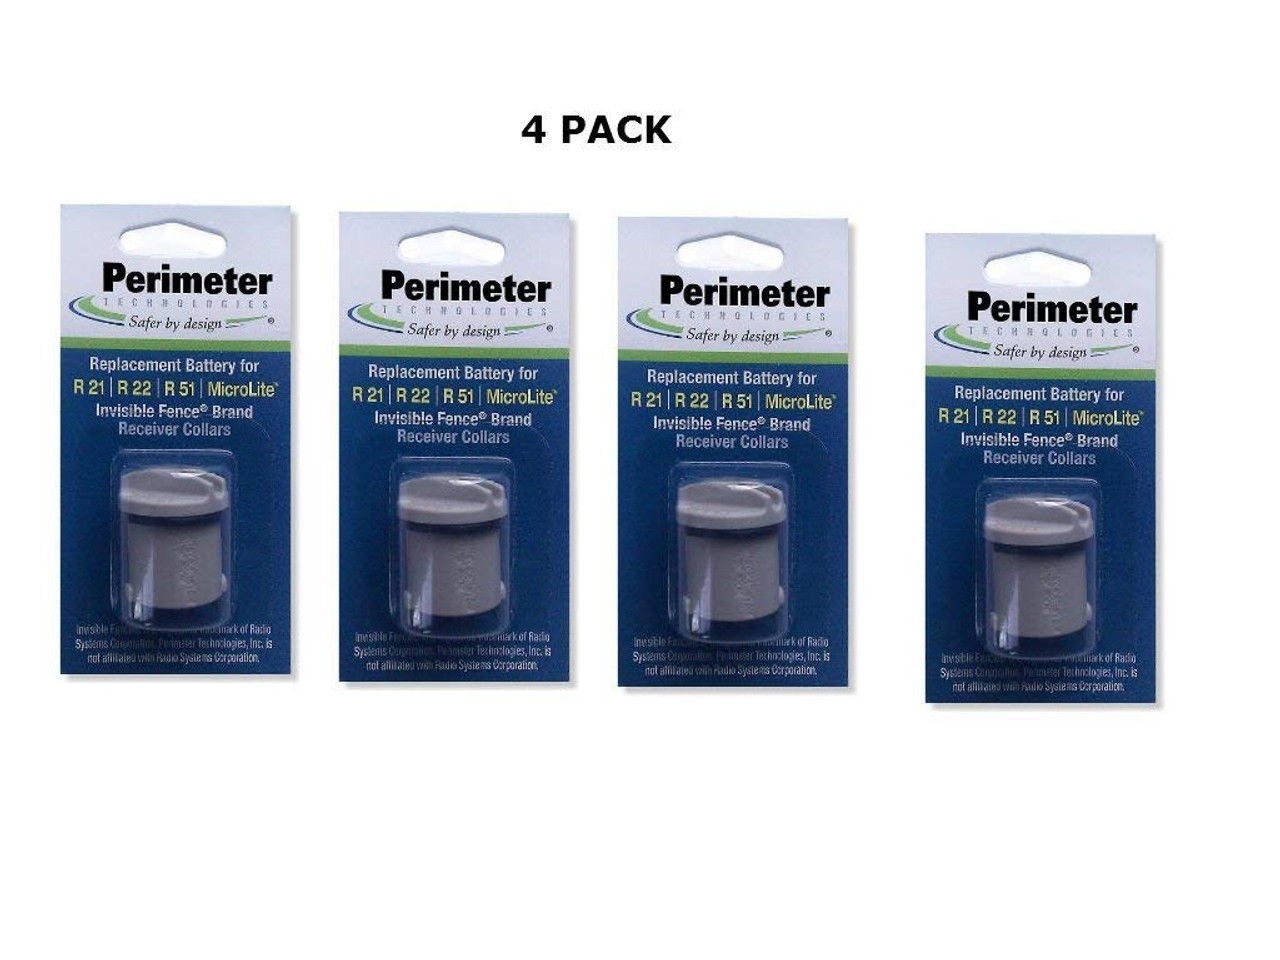 Perimeter Technologies Invisible Fence Compatible R21 and R51 Dog